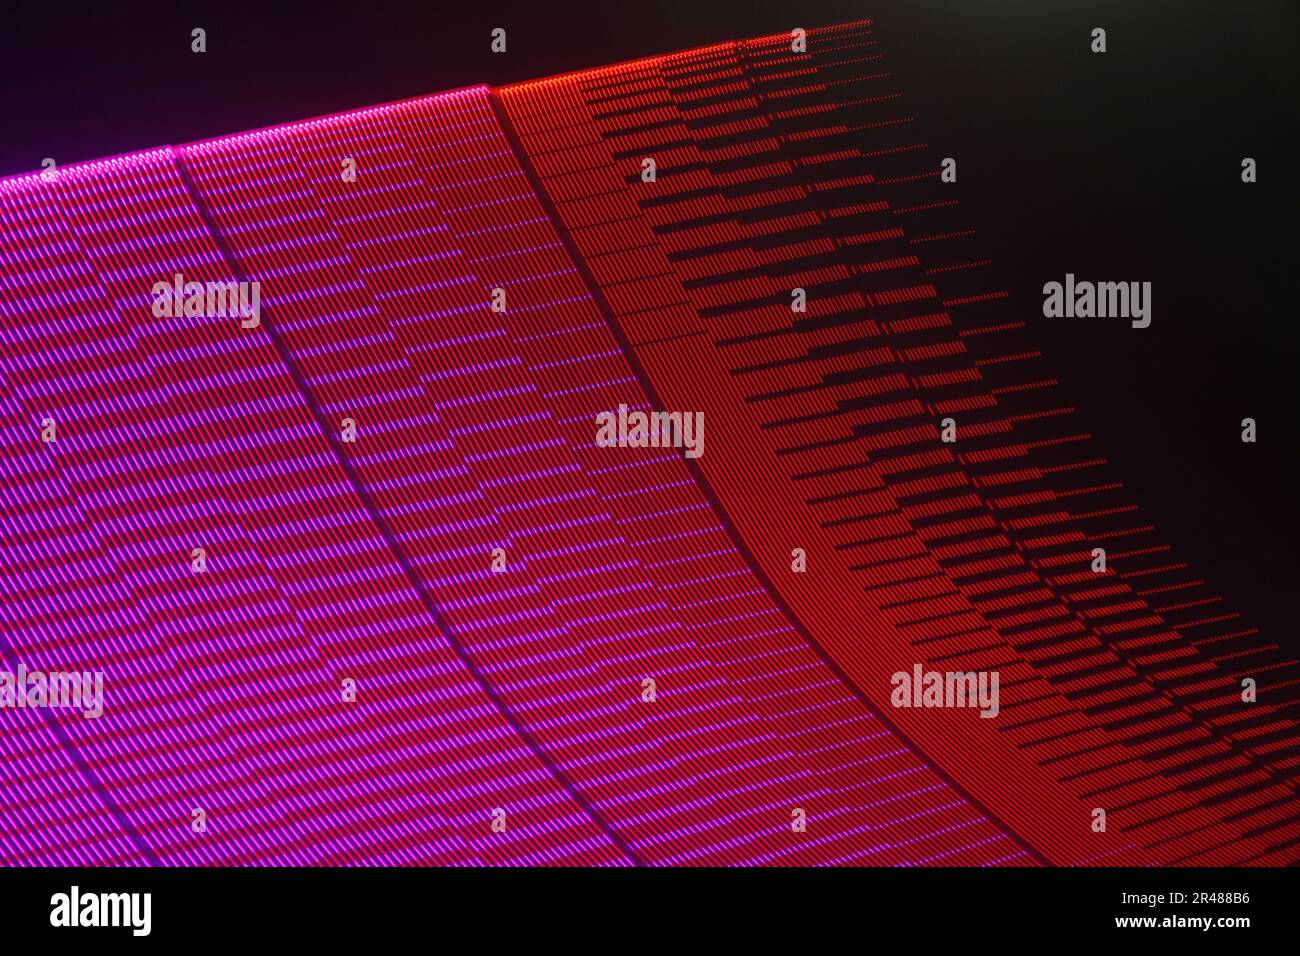 A large display featuring a pattern of purple and red lights radiating outward along distinct lines Stock Photo